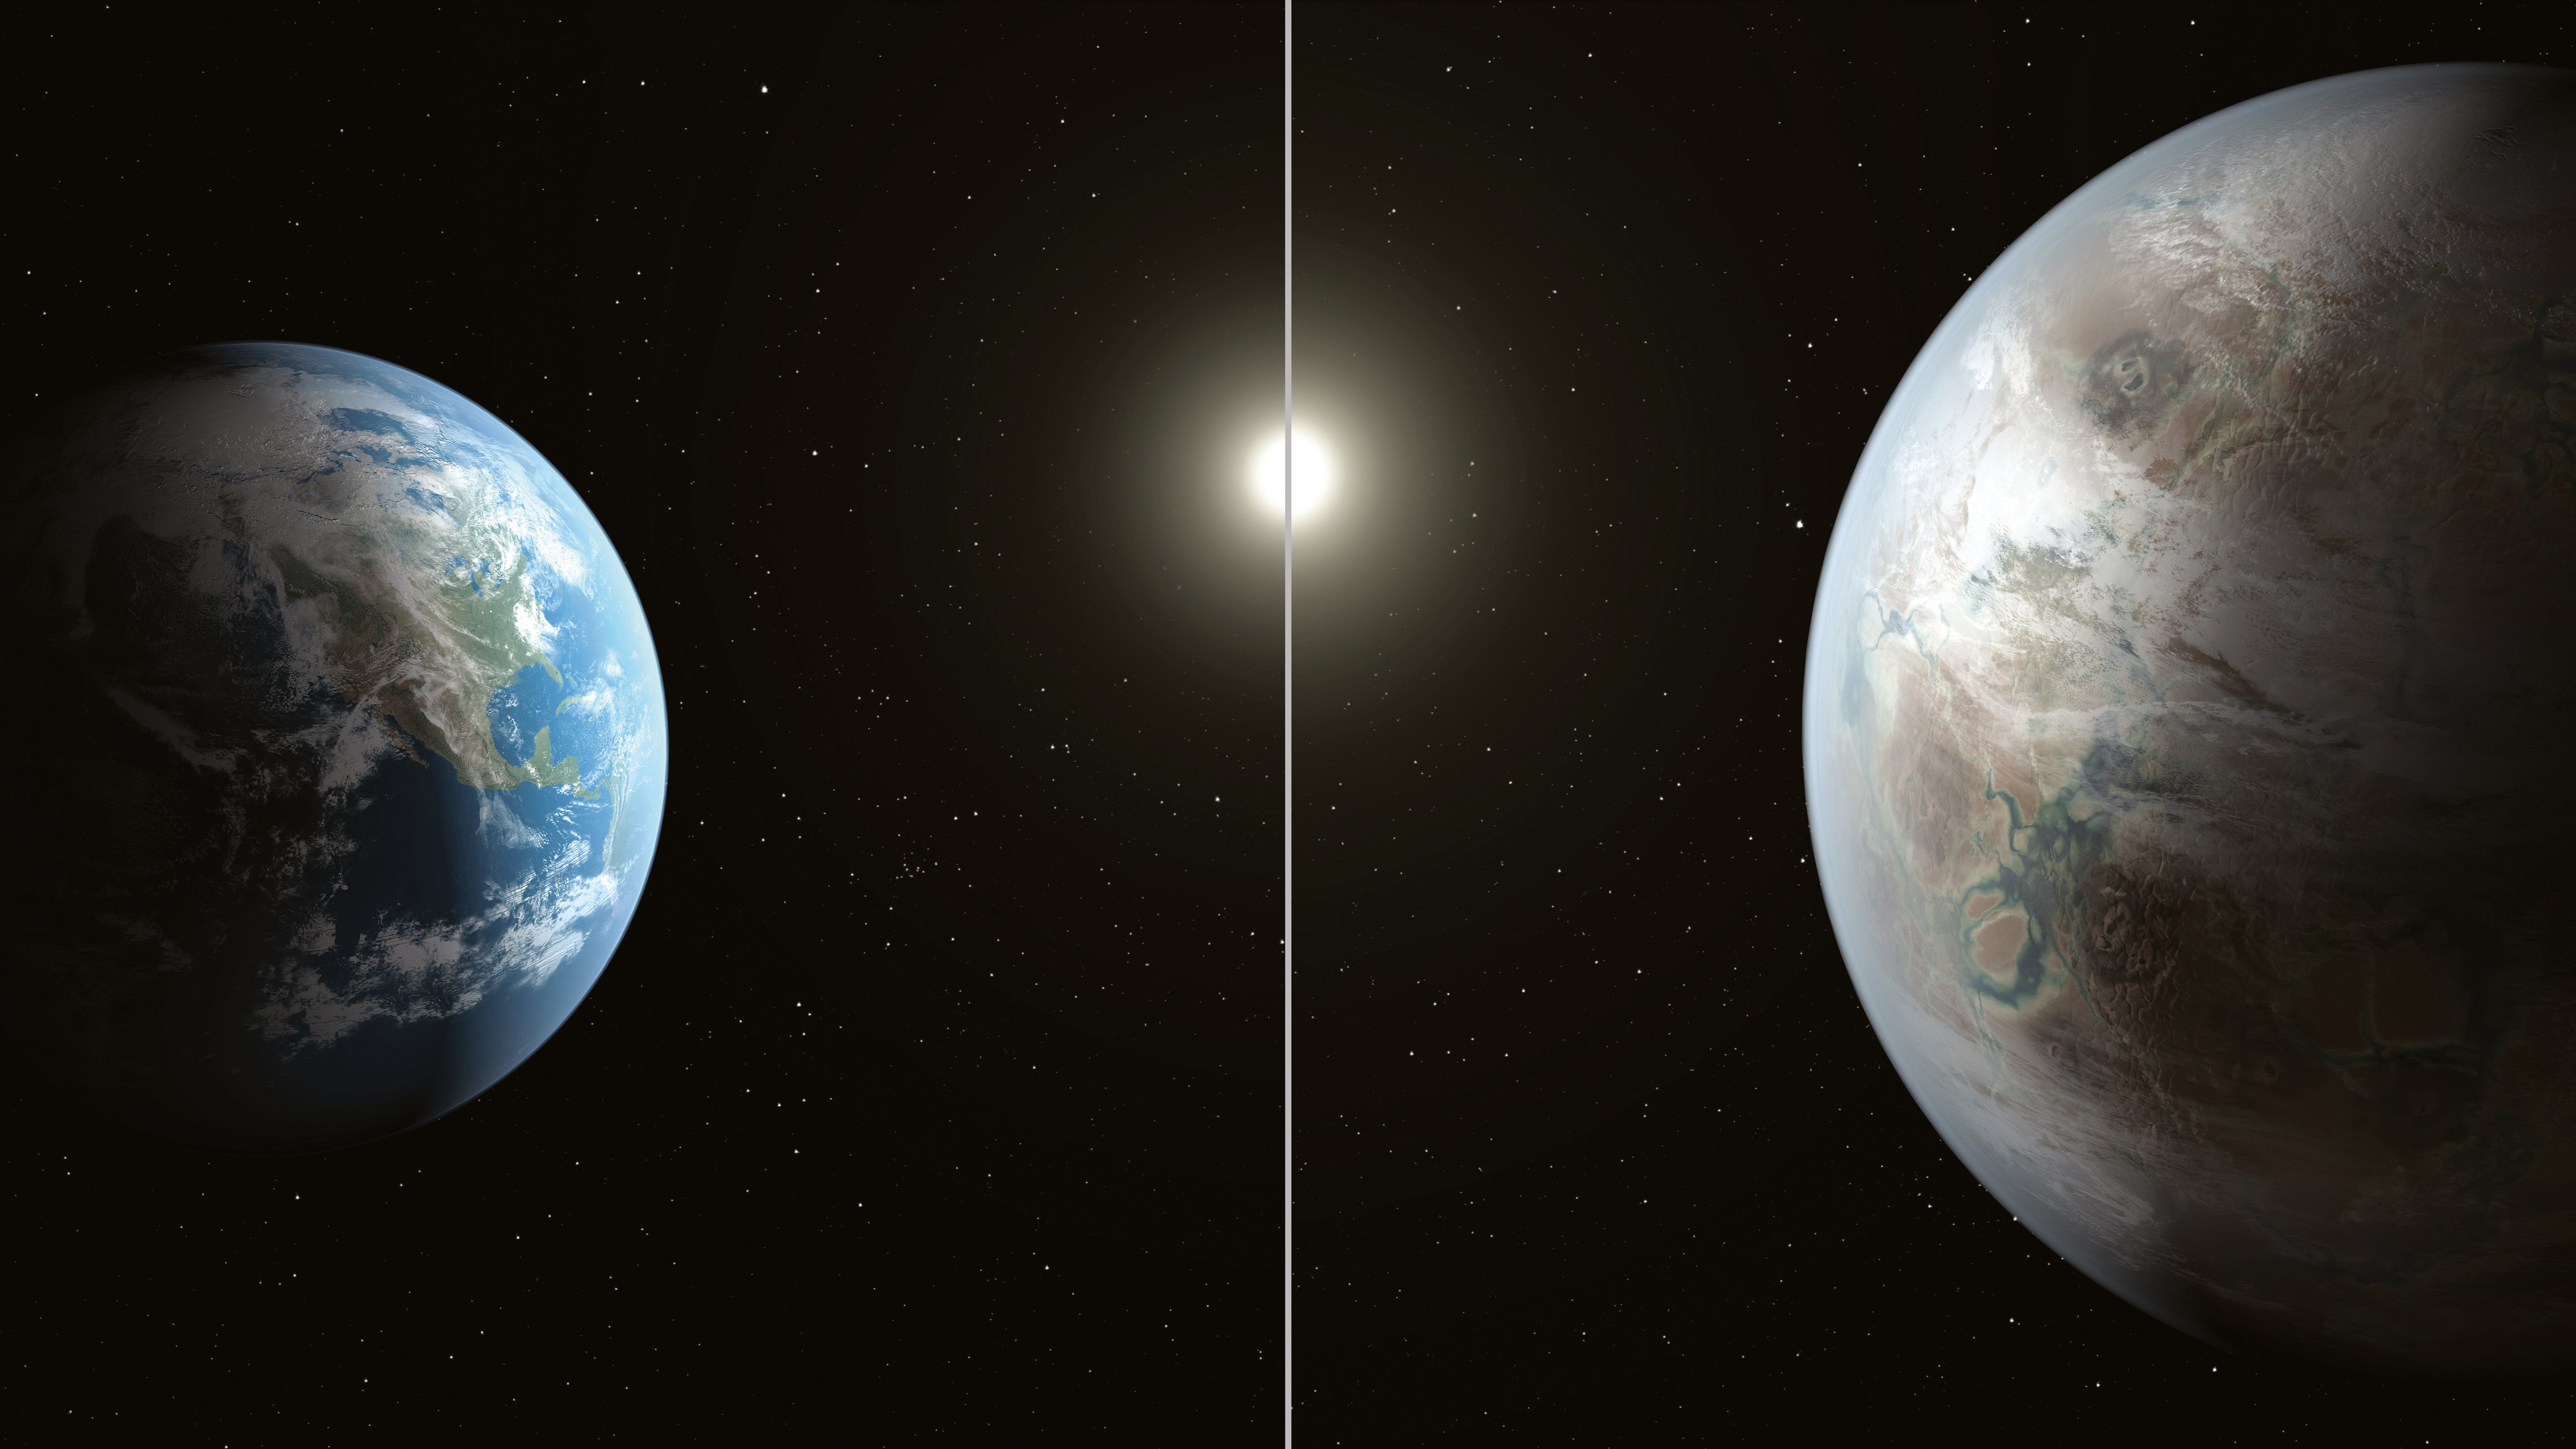 An artist's impression compares earth (left) to a planet newly discovered just outside our solar system. Photo: Nasa